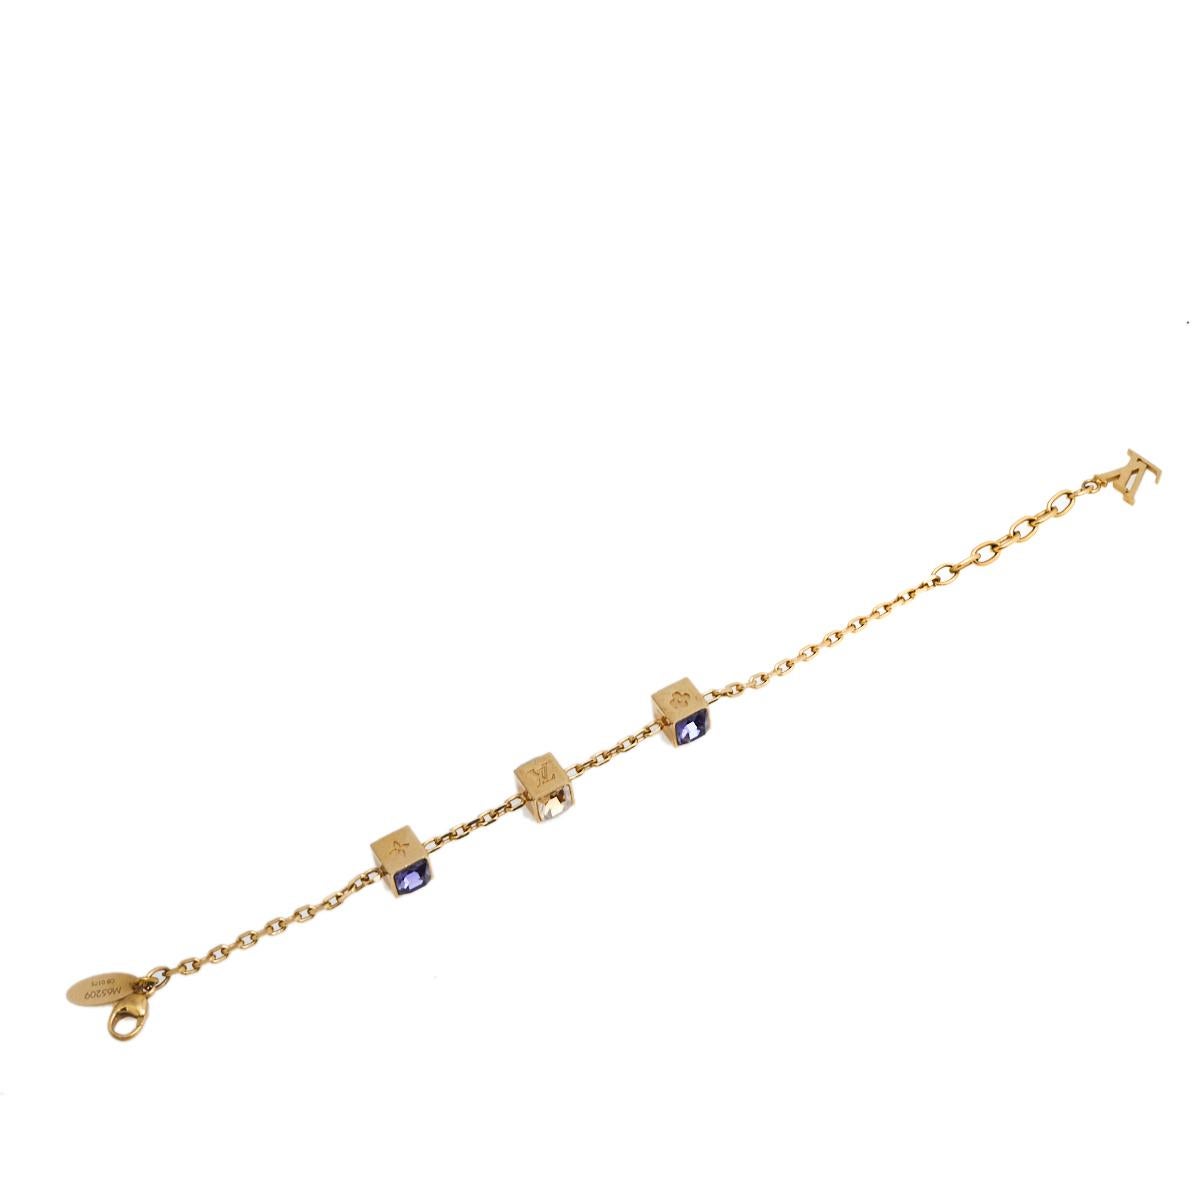 Artfully made from gold-tone metal, this flawless bracelet by Louis Vuitton can be your next prized possession. Featuring a gorgeous set of 3 cubes synonymous with the Gamble theme with monogram engravings and crystals, the design has been finished